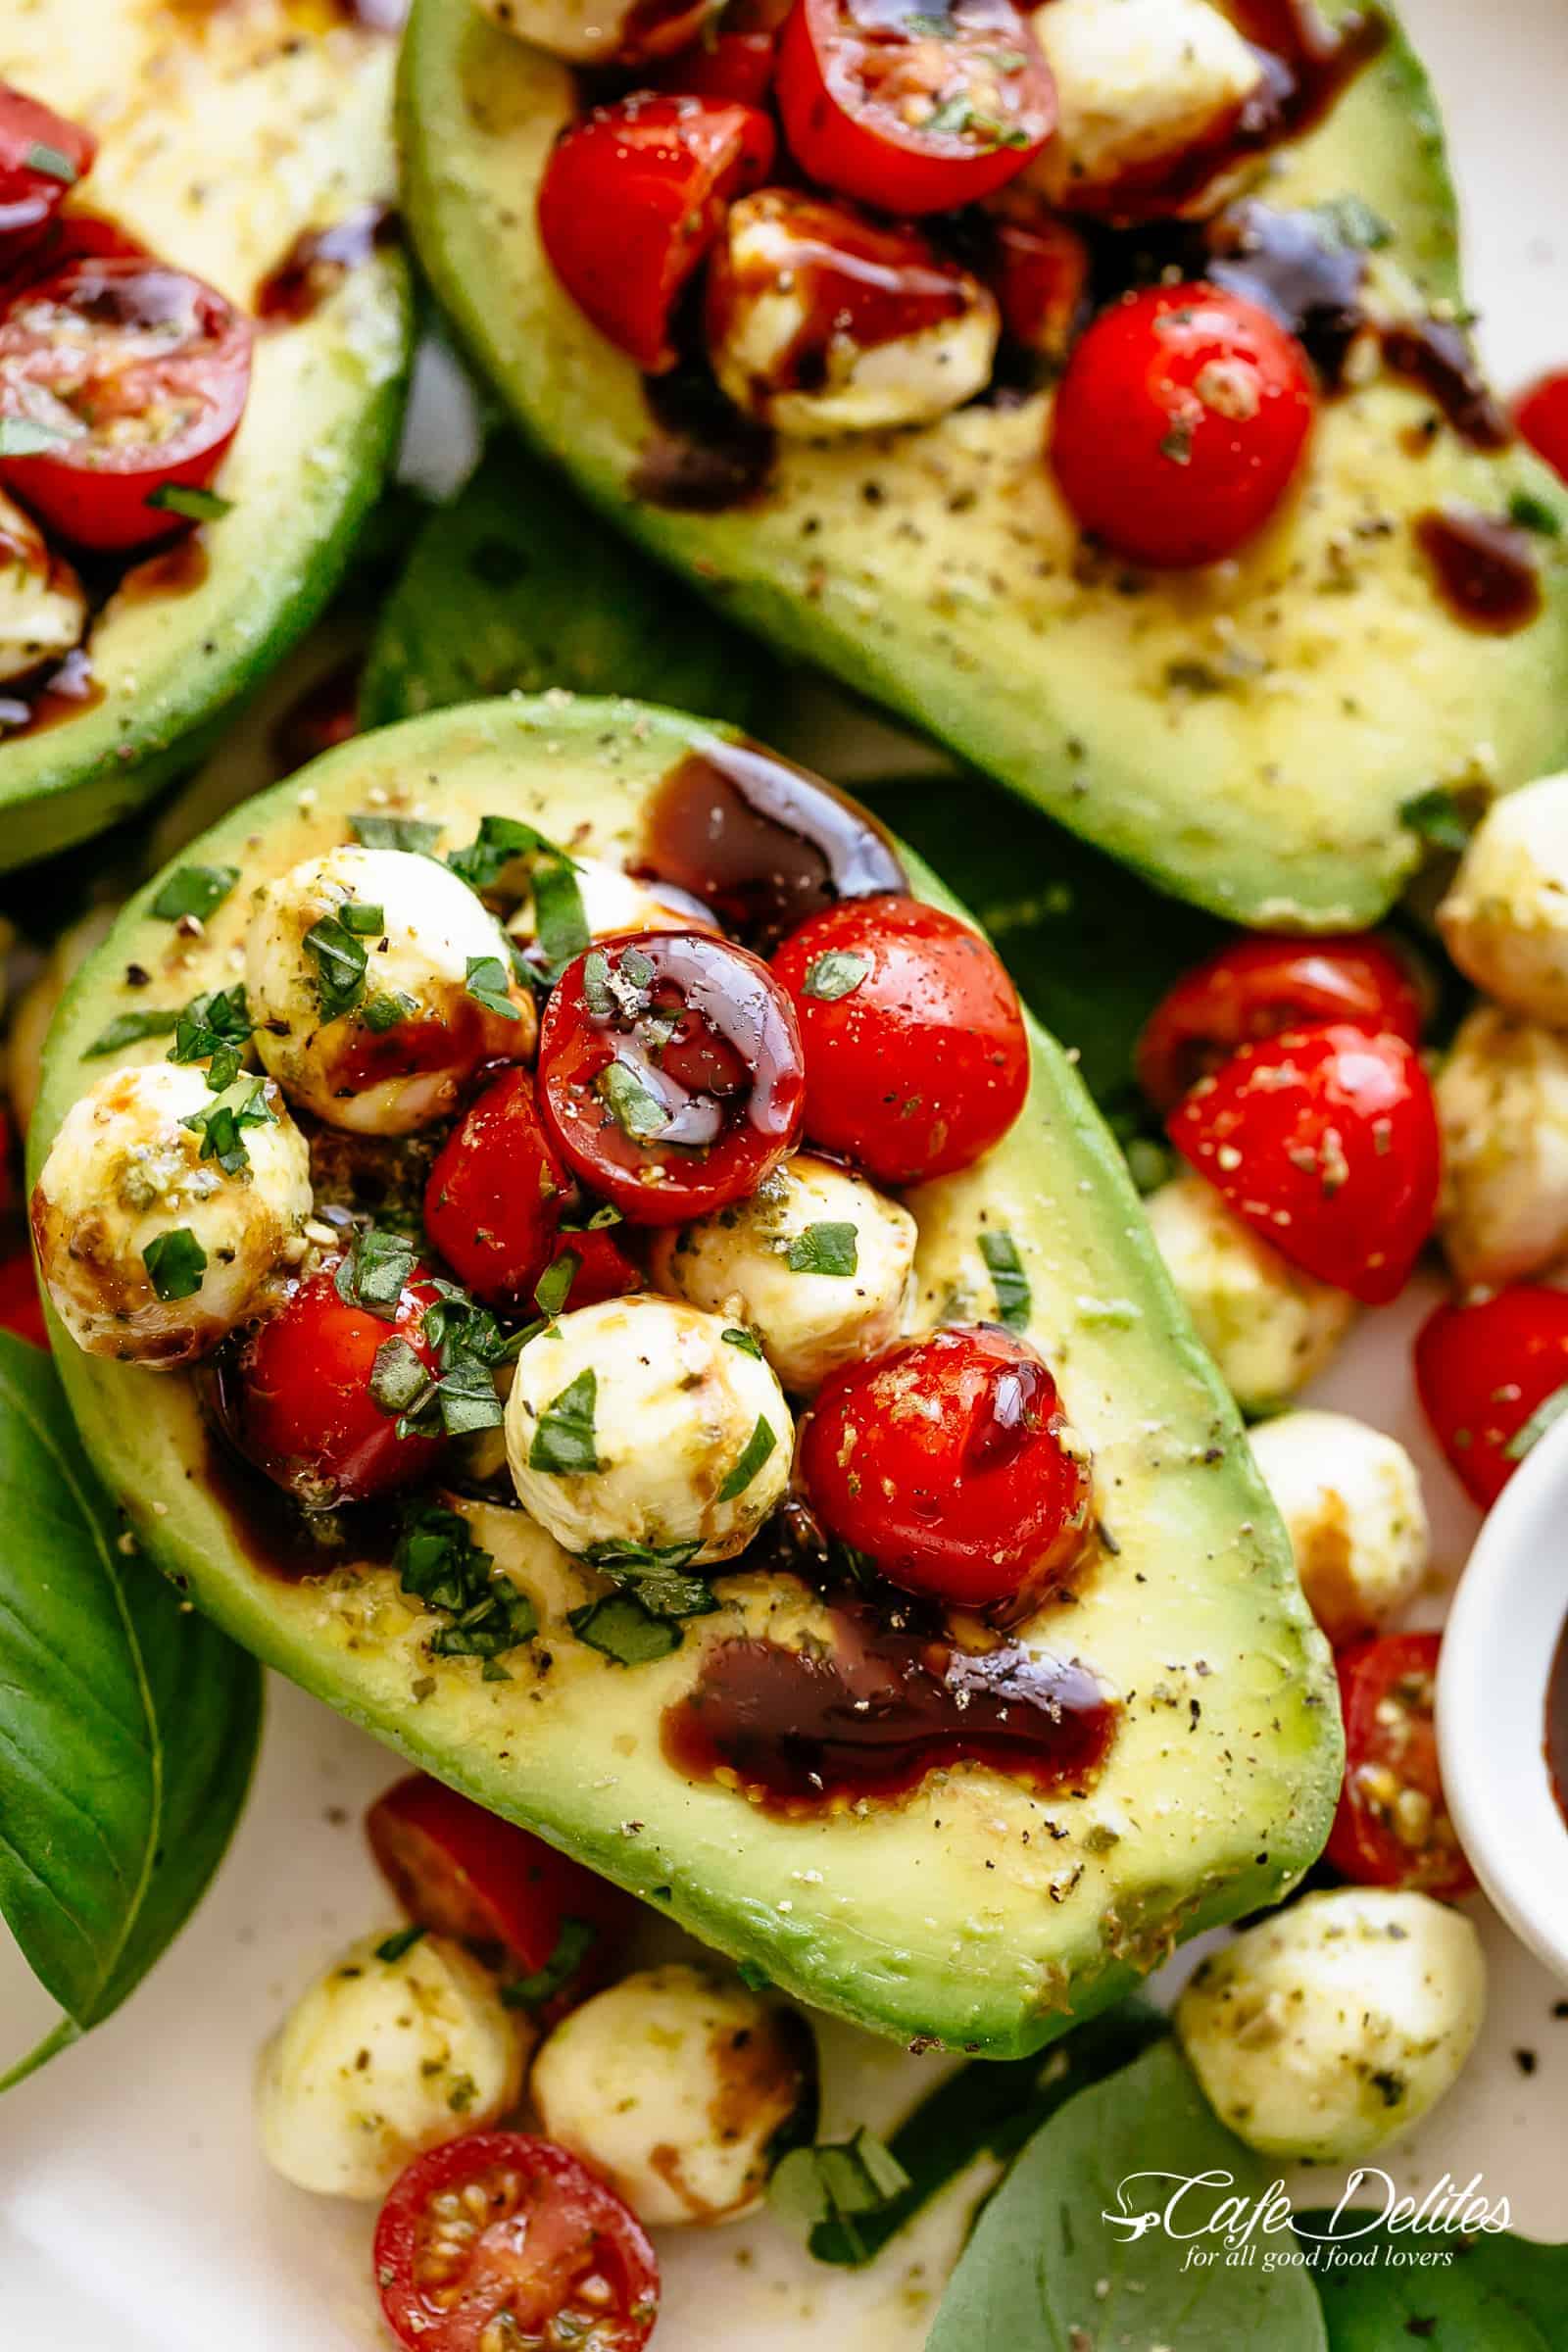 Basil Pesto Caprese Stuffed Avocado drizzled with balsamic glaze make an incredible light lunch or snack! Take creamy avocados to a different level! Sweet and juicy grape/cherry tomatoes with fresh mozzarella balls are tossed through basil pesto and spooned into avocado halves! | cafedelites.com